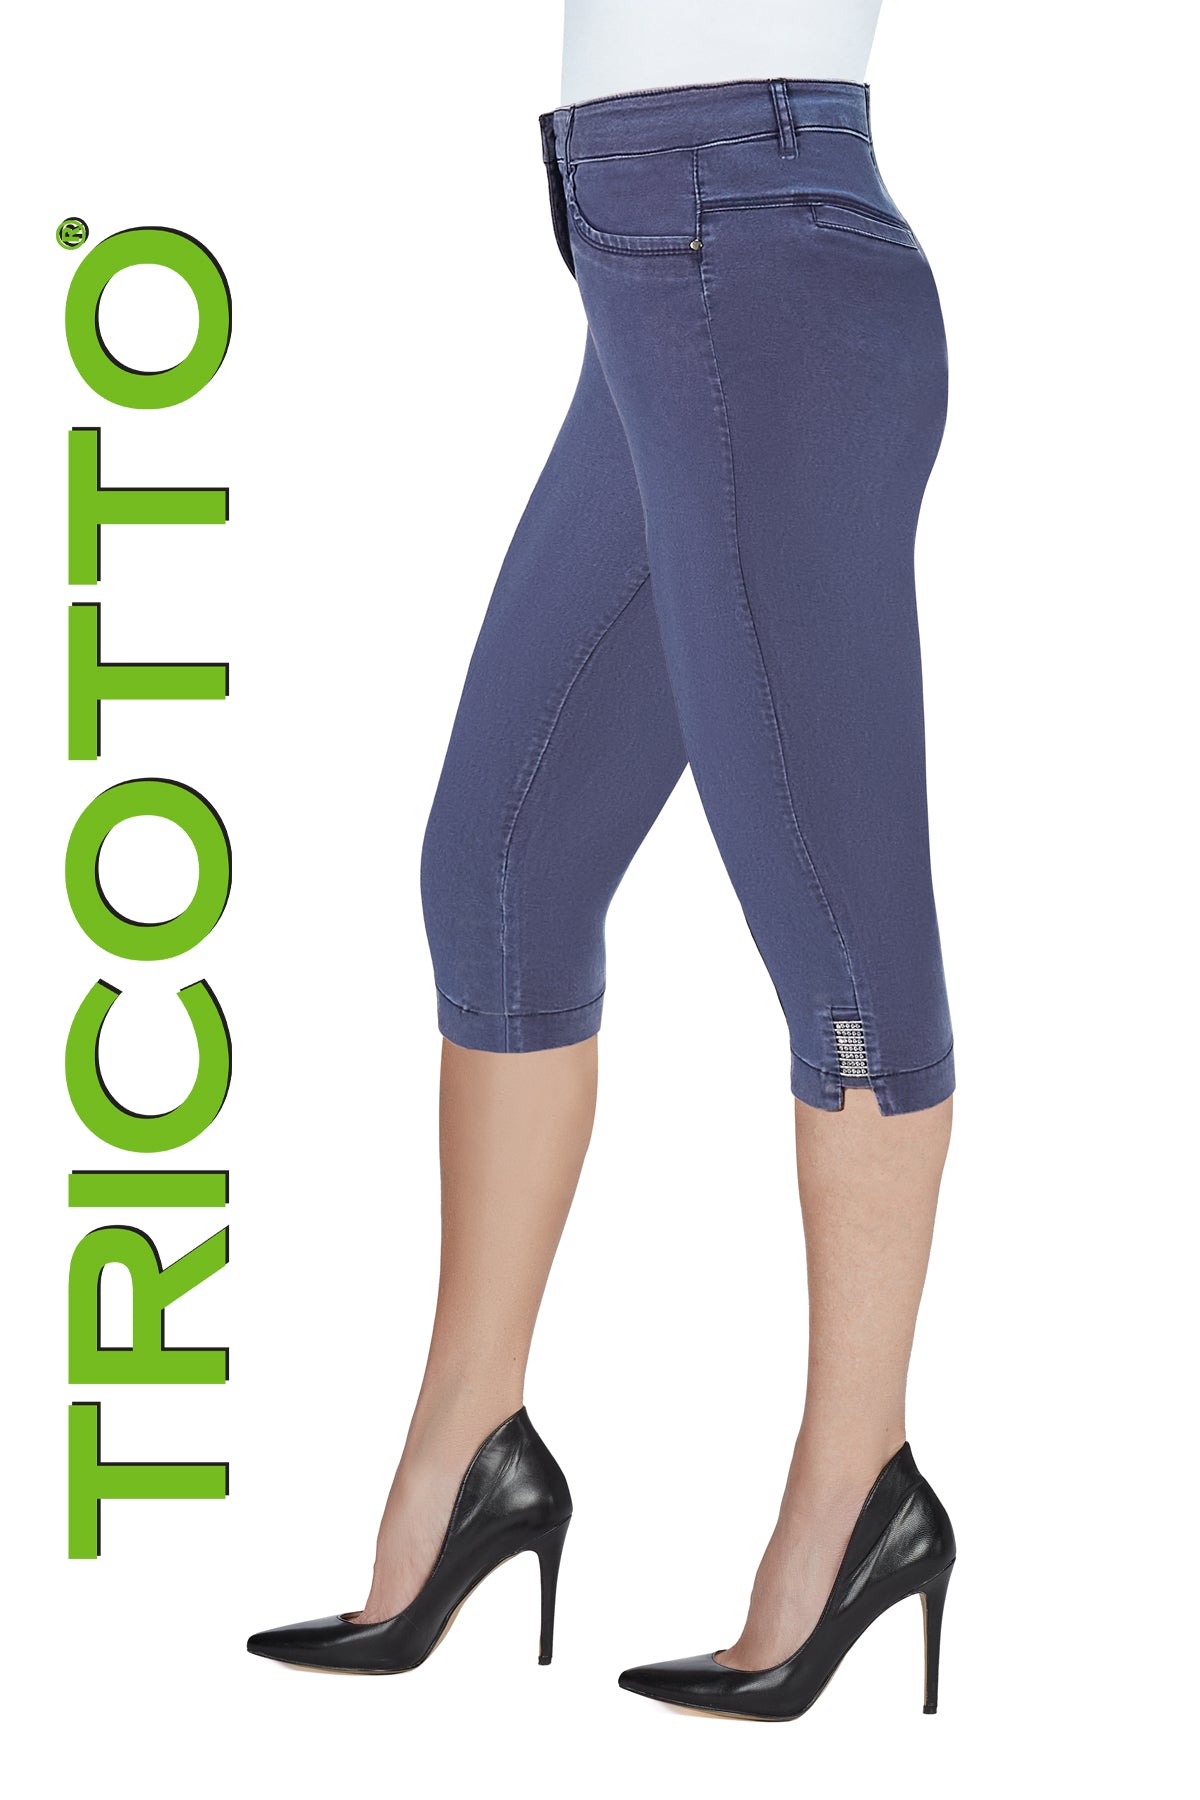 Tricotto Blue Capris with zipper front and sequin hem detail